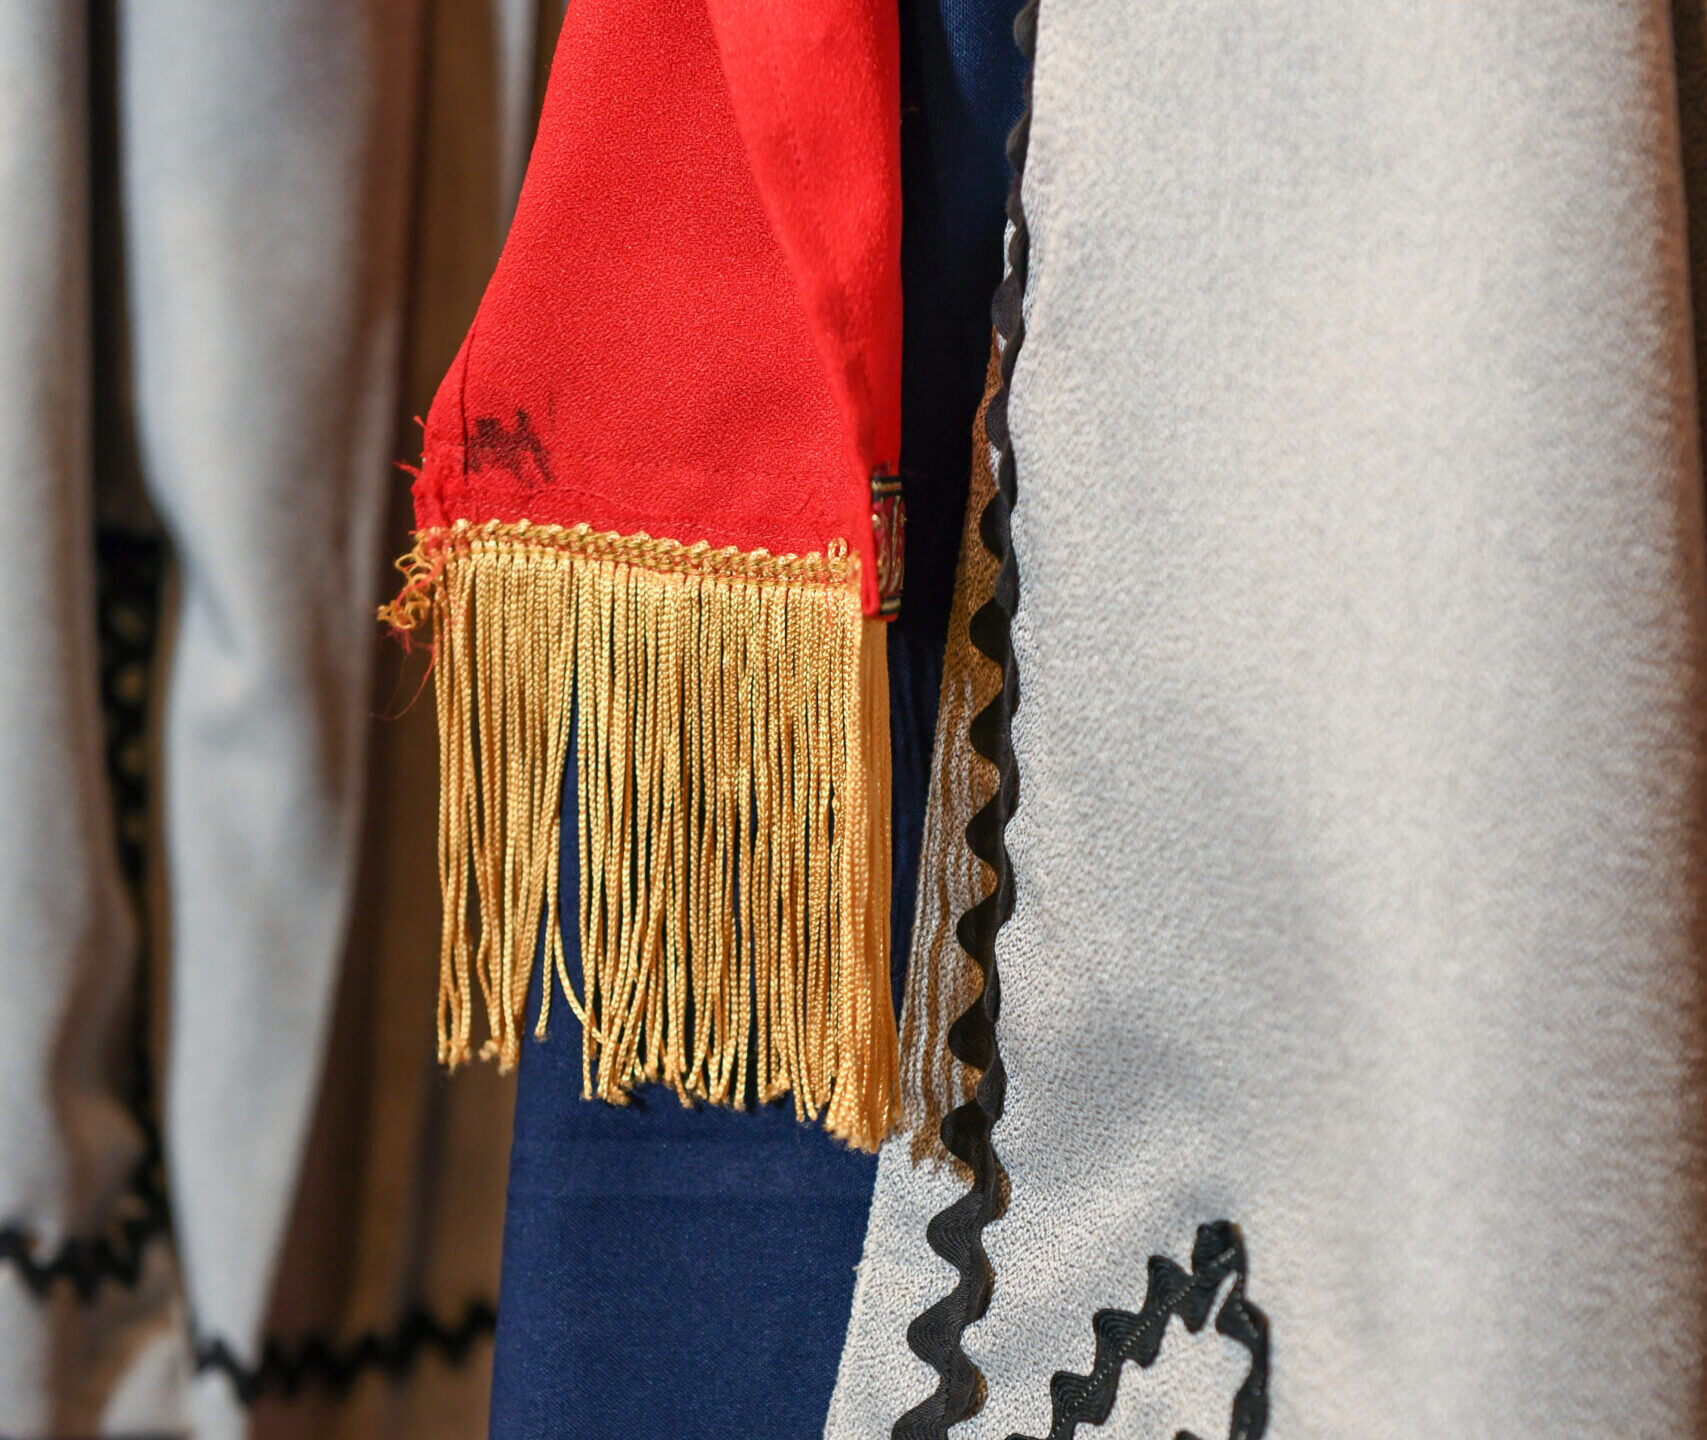 Detail of a grey coat with black embroidery and a red sash with yellow tassles.